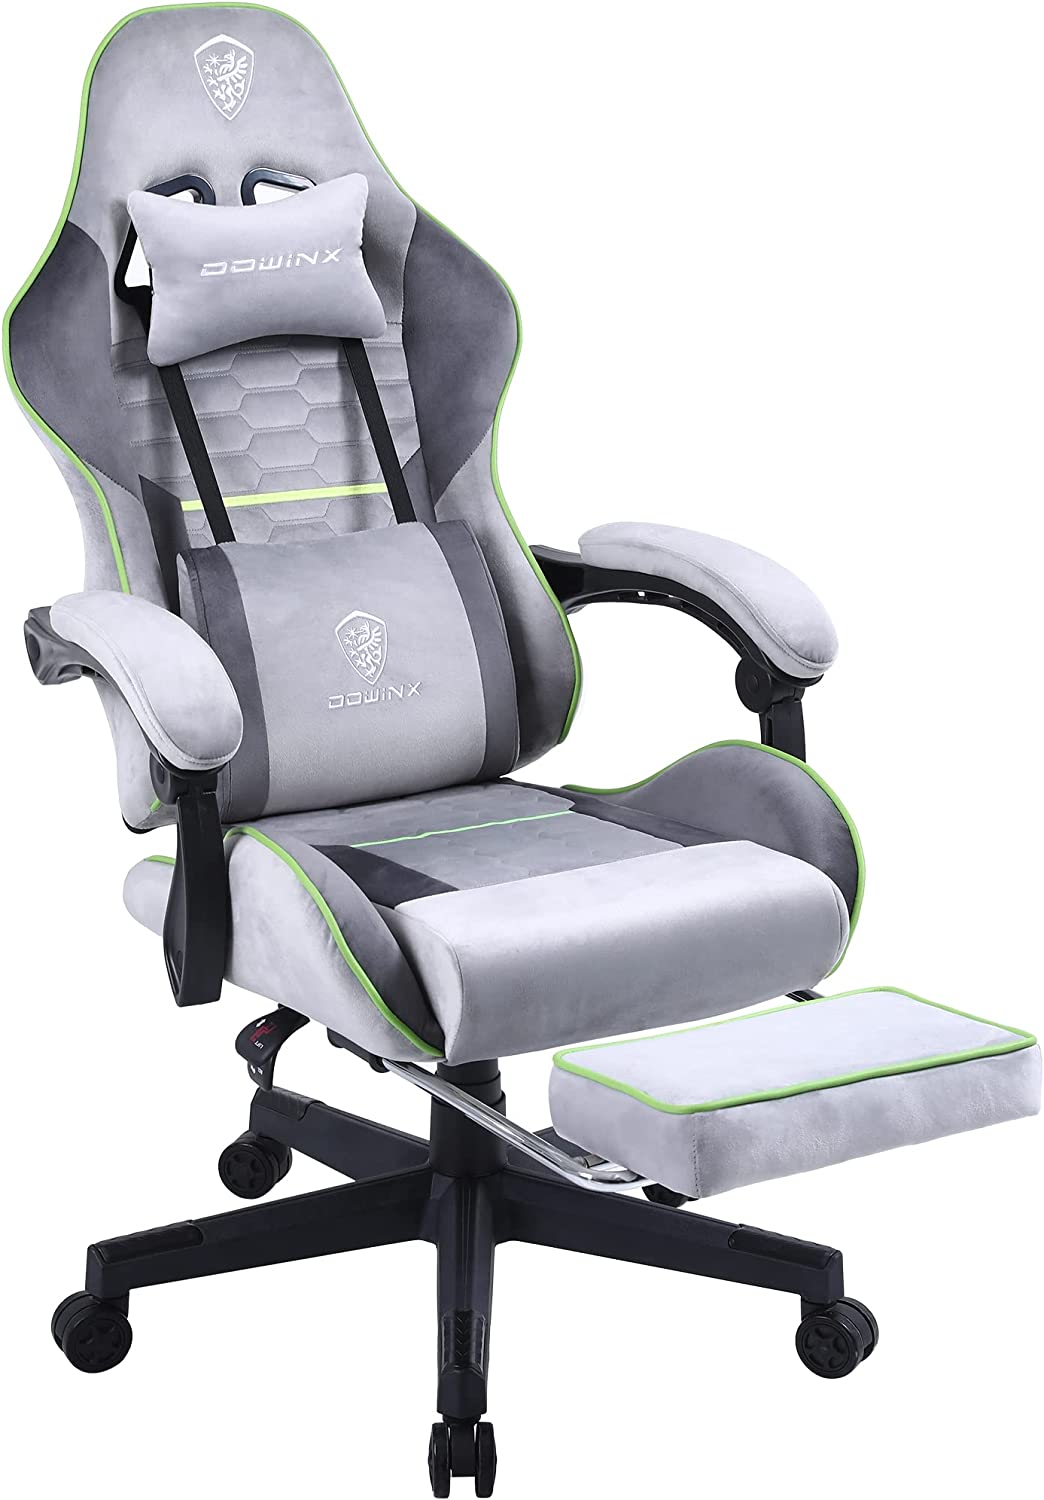 Dowinx Gaming Chair Fabric with Pocket Spring Cushion Light Grey 